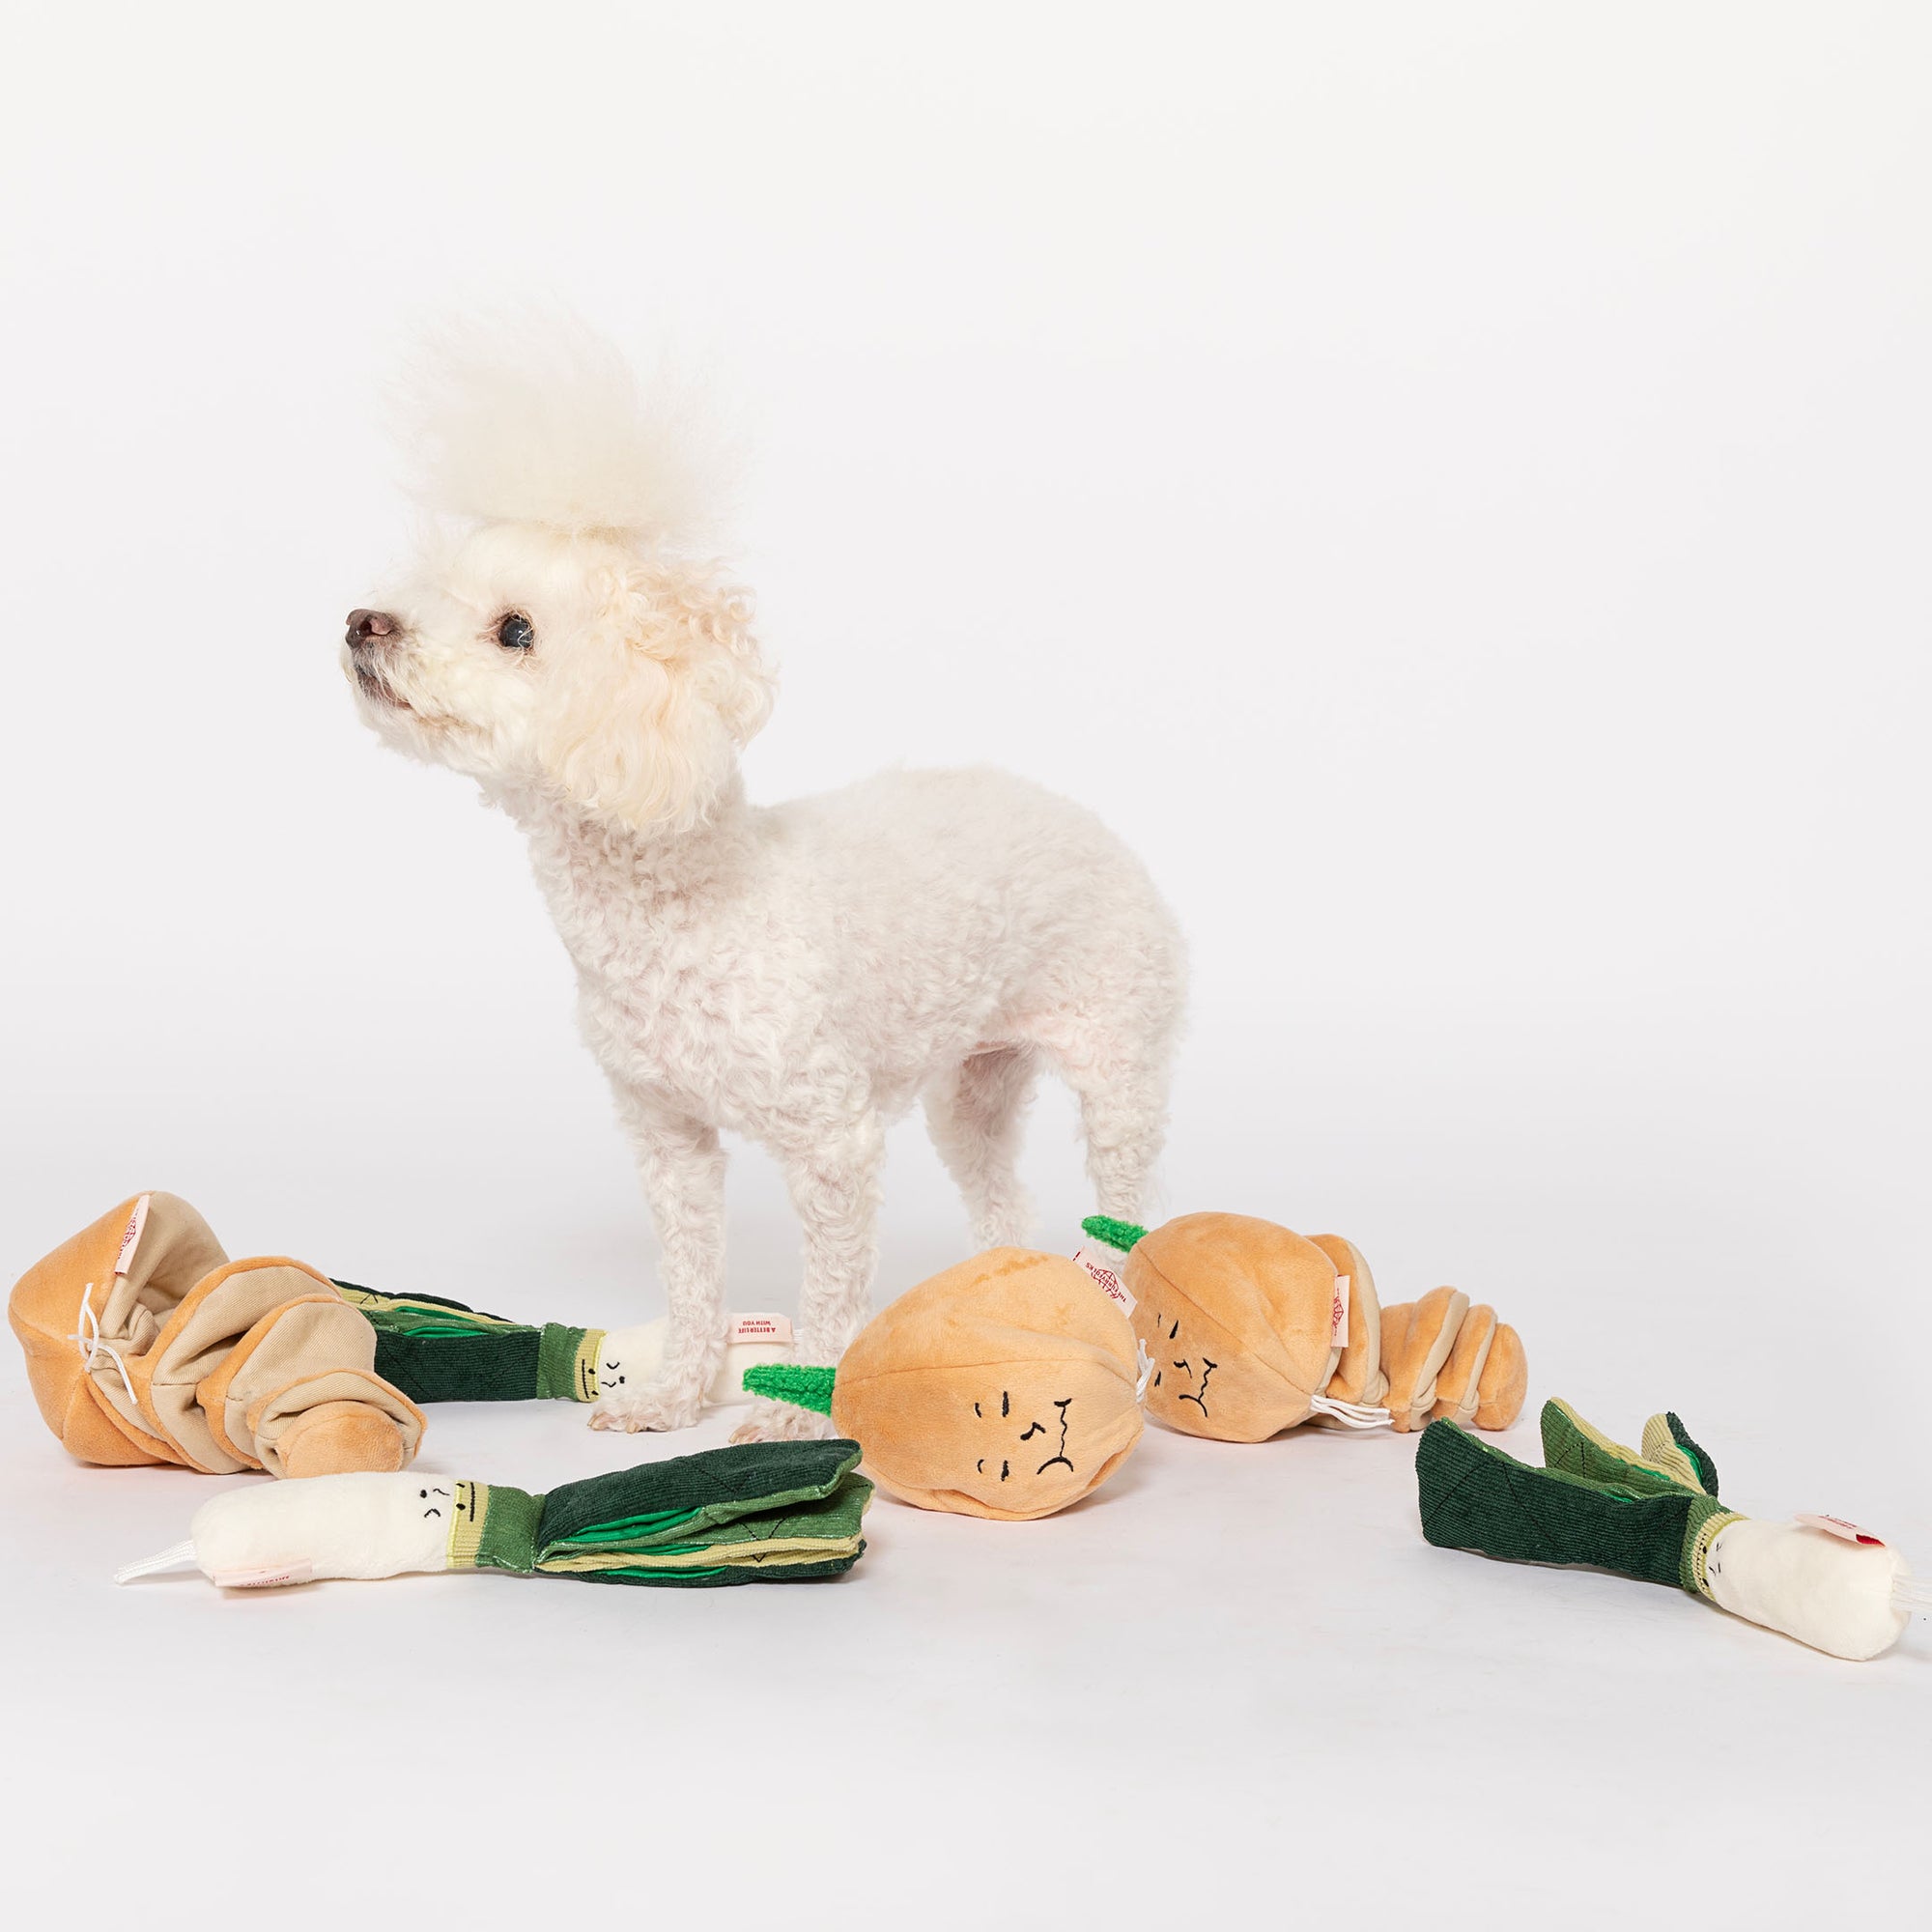 a white poodle with a stylishly fluffy head of hair, standing alert among various yellow onion-shaped plush toys, some of which are opened to reveal layers and compartments. This setting emphasizes the interactive nature of the toys, designed for cognitive stimulation and play for dogs.